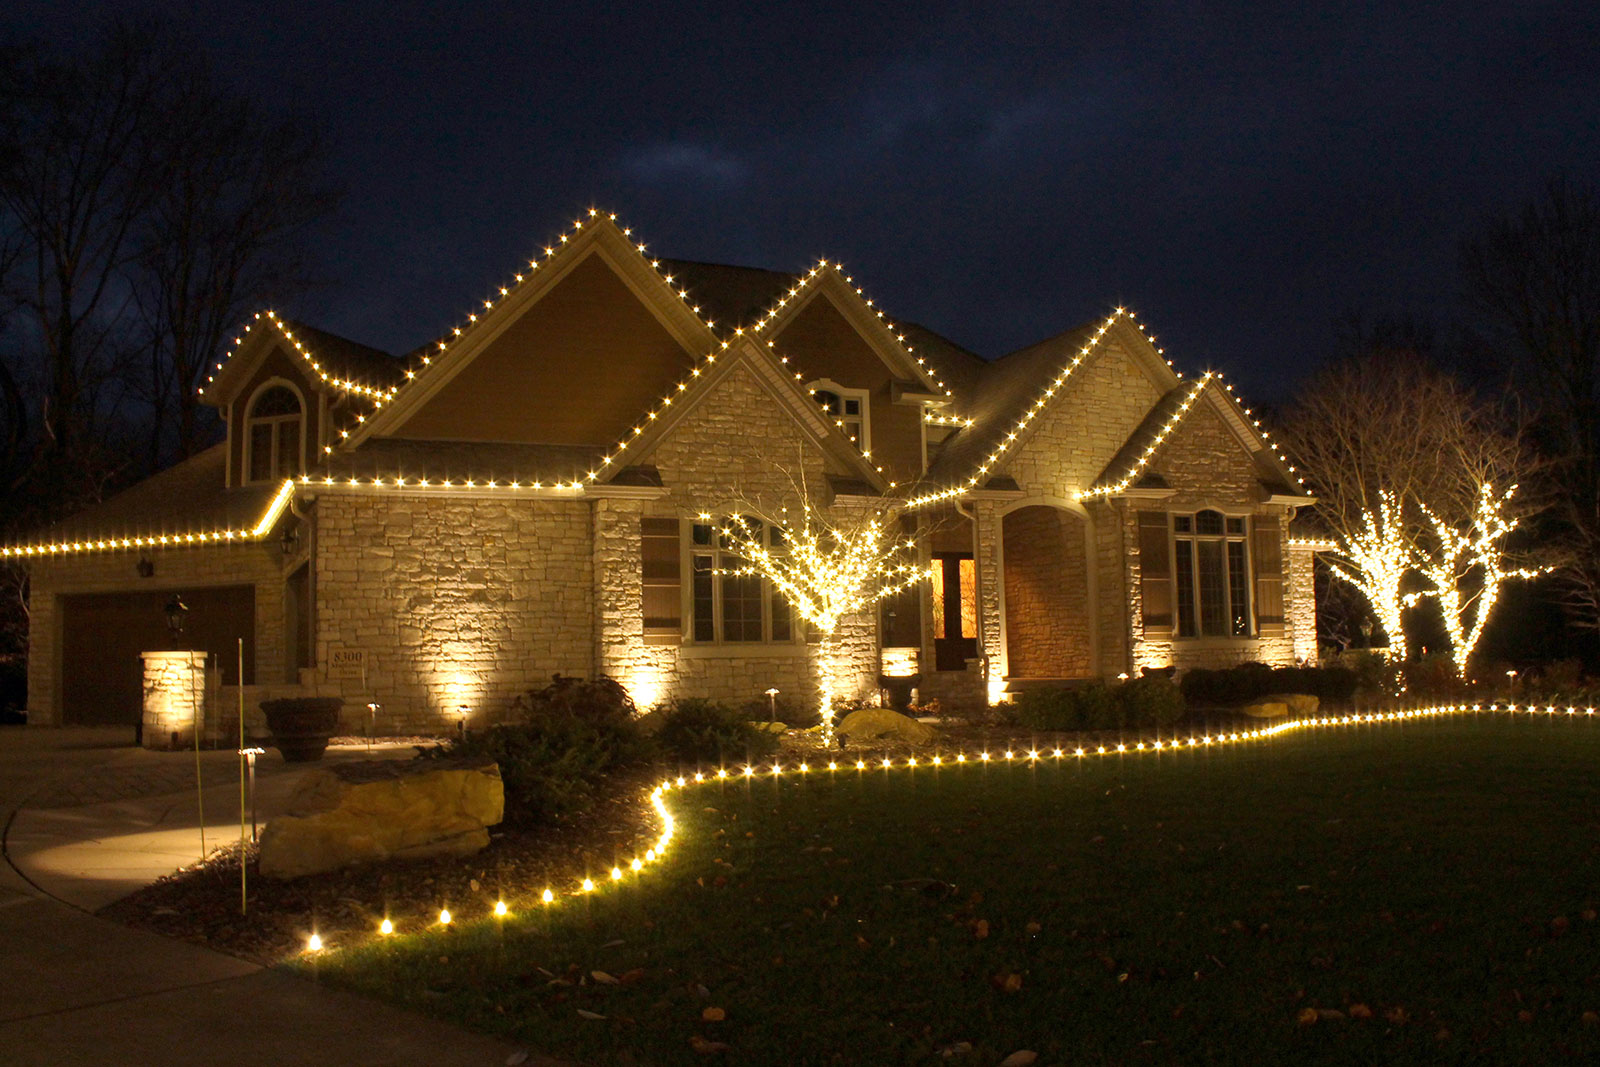 Residential House with Holiday Christmas Lighting